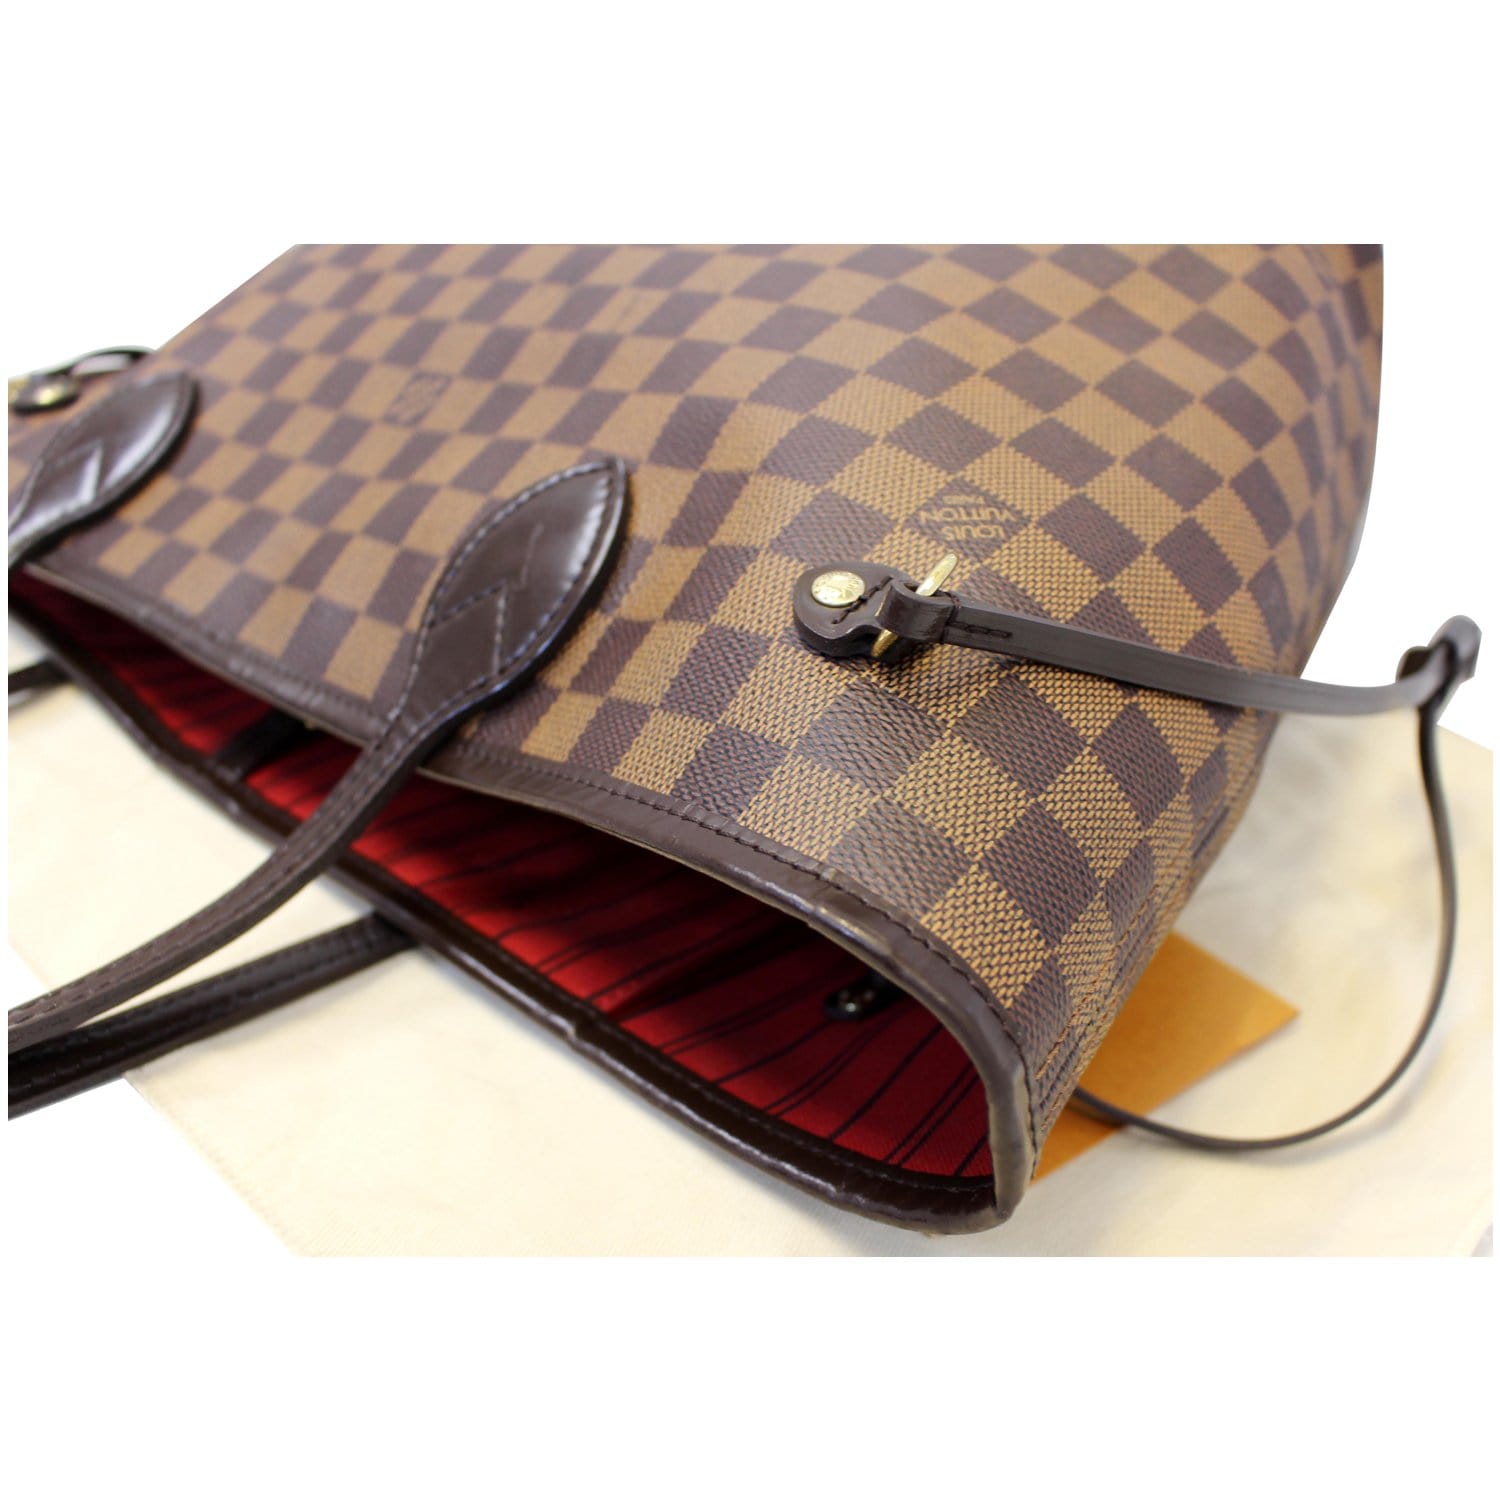 Pre-Owned Louis Vuitton Neverfull MM Damier Ebene Tote 